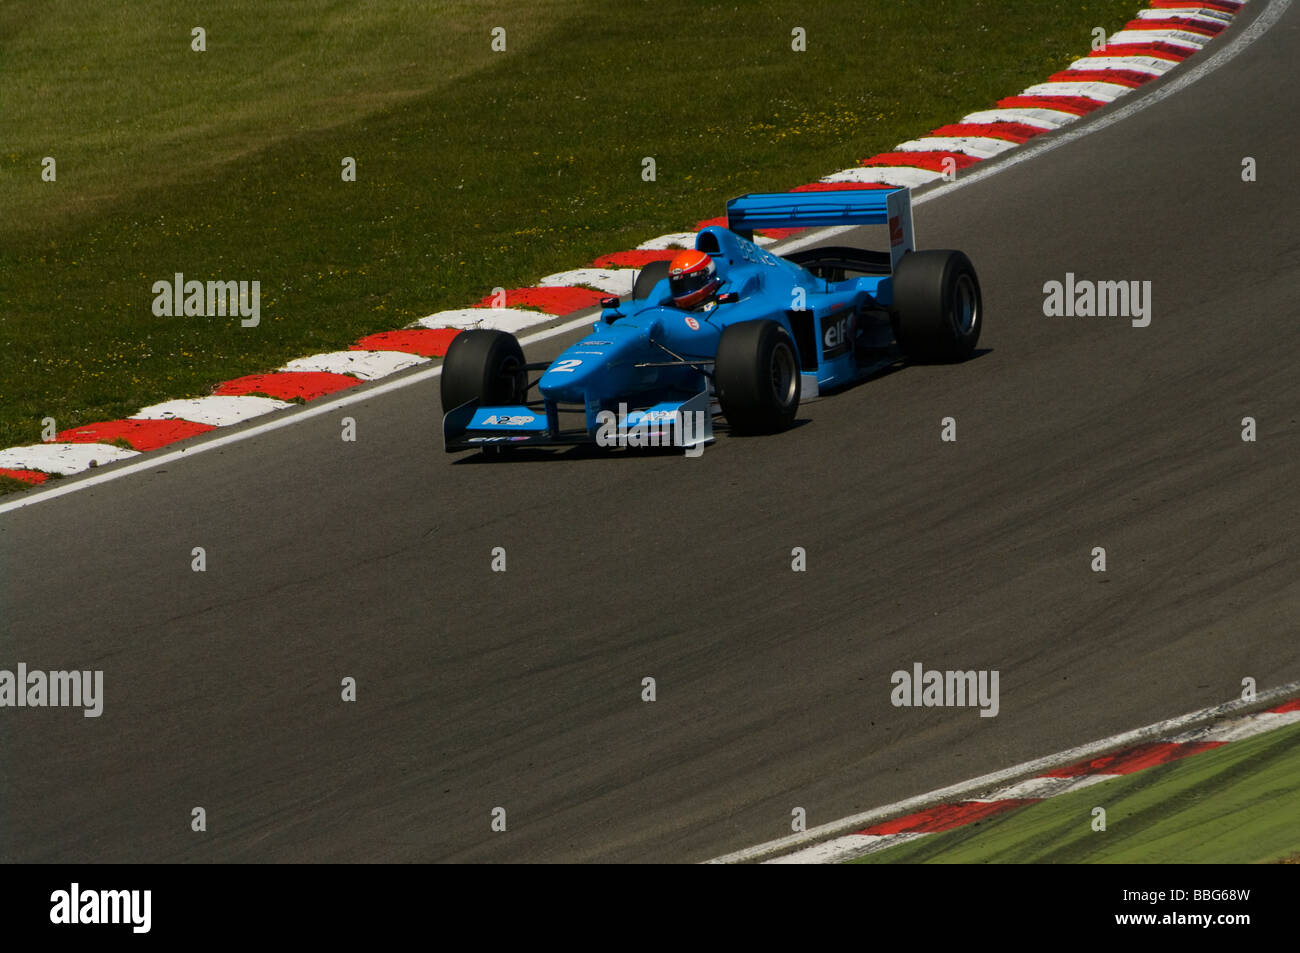 Benetton Race Car High Resolution Stock Photography and Images - Alamy